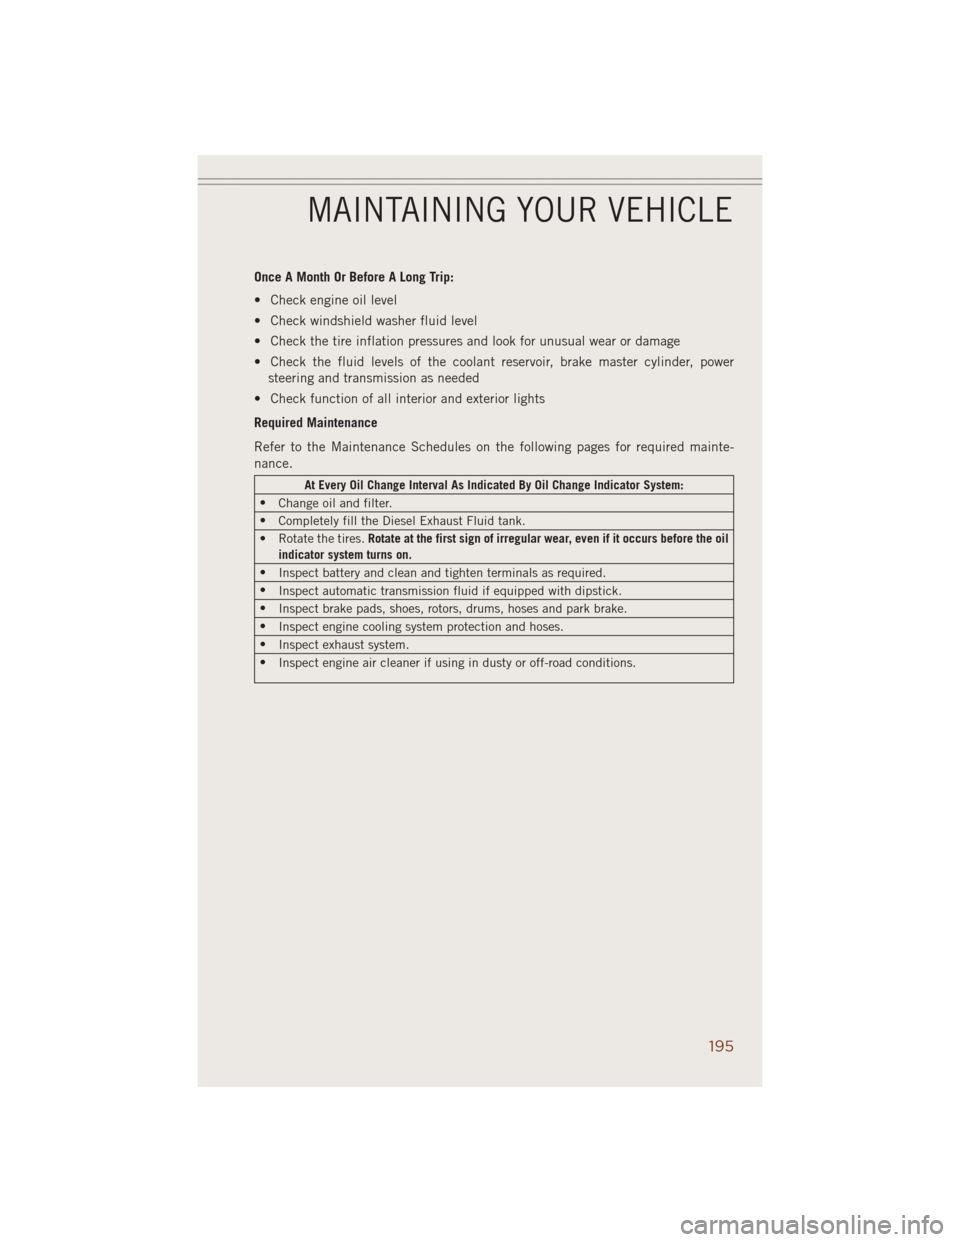 JEEP GRAND CHEROKEE 2014 WK2 / 4.G User Guide Once A Month Or Before A Long Trip:
• Check engine oil level
• Check windshield washer fluid level
• Check the tire inflation pressures and look for unusual wear or damage
• Check the fluid le